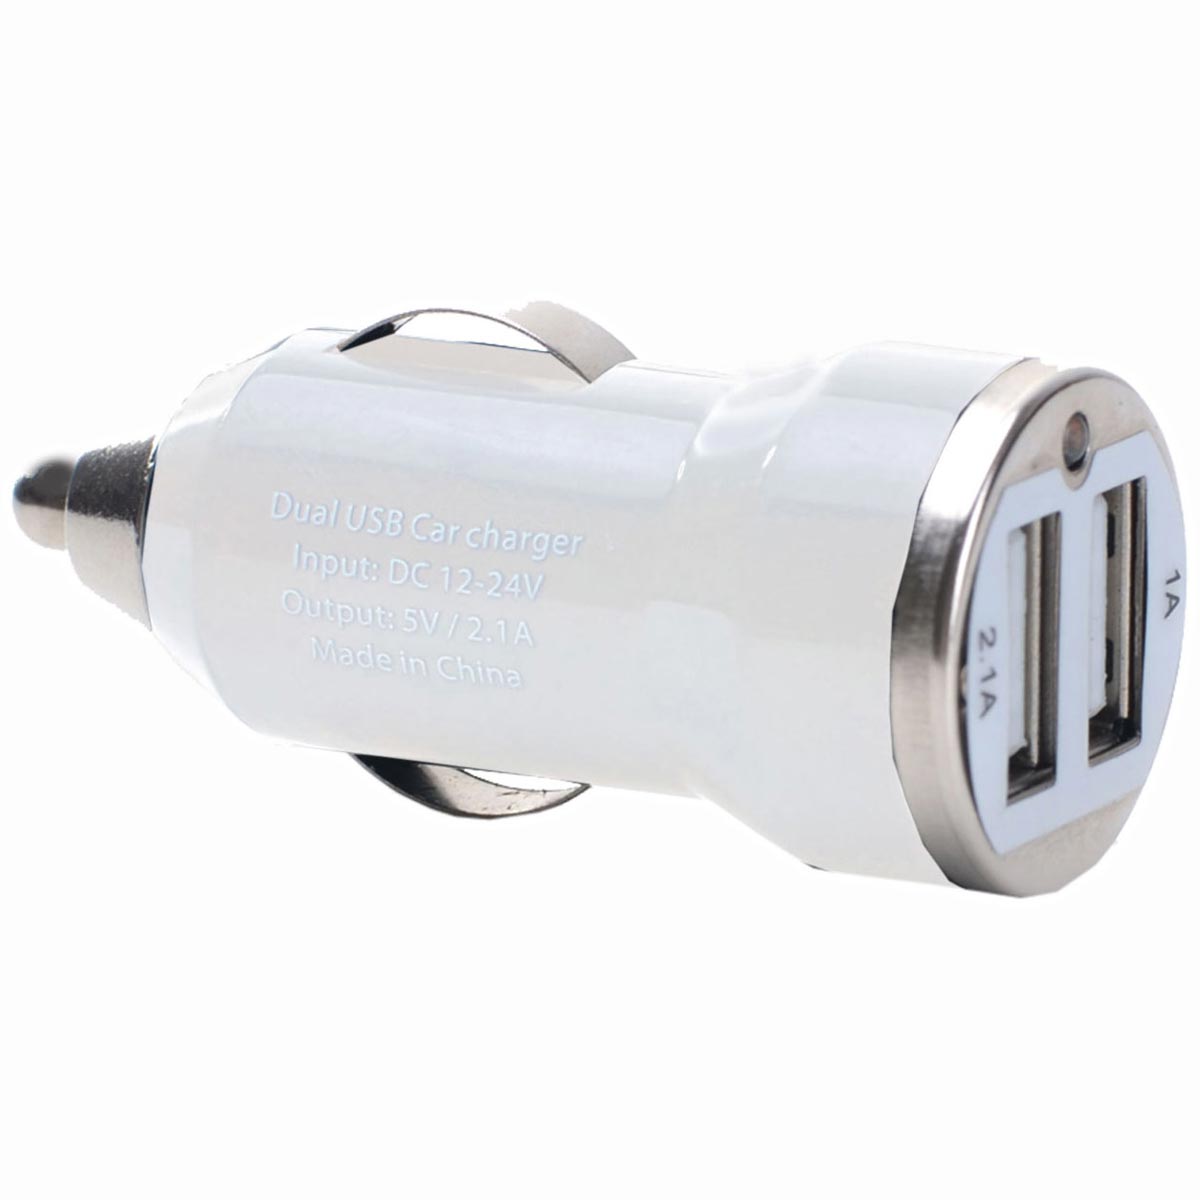 Simply Dual USB Car Charger - White